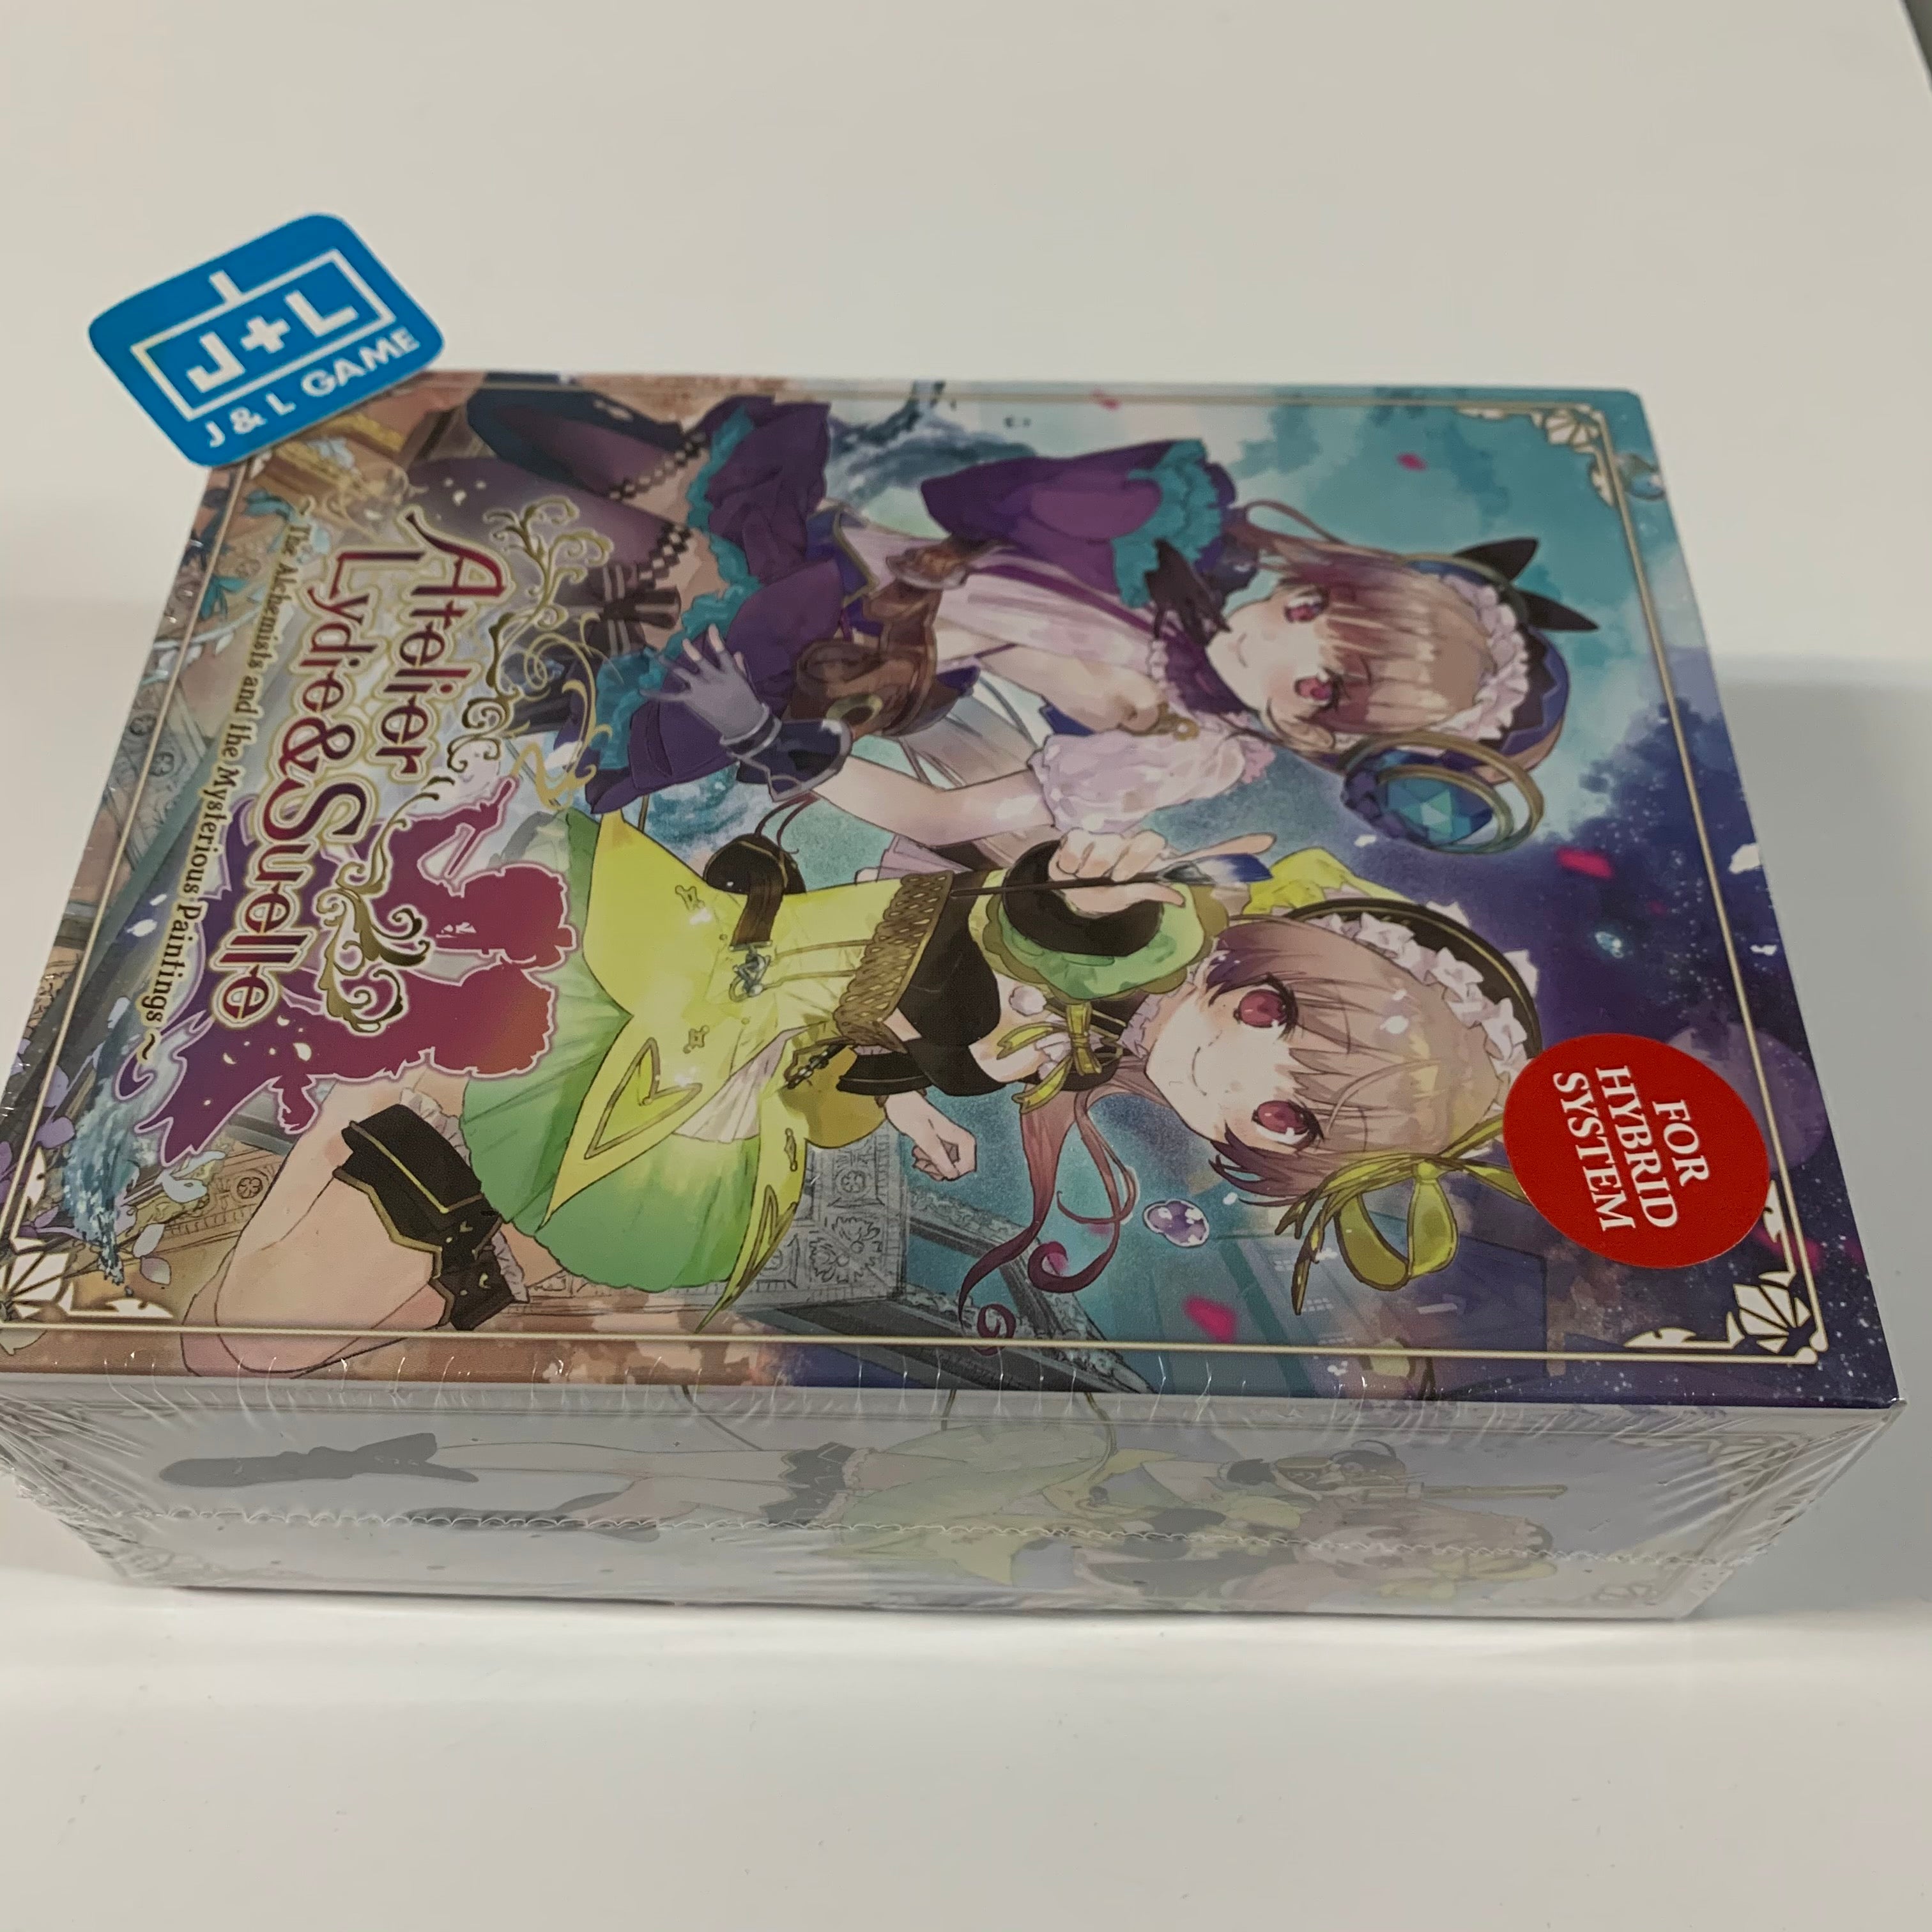 Atelier Lydie & Suelle: The Alchemists and the Mysterious Paintings Limited Edition - (NSW) Nintendo Switch Video Games Koei Tecmo Games   